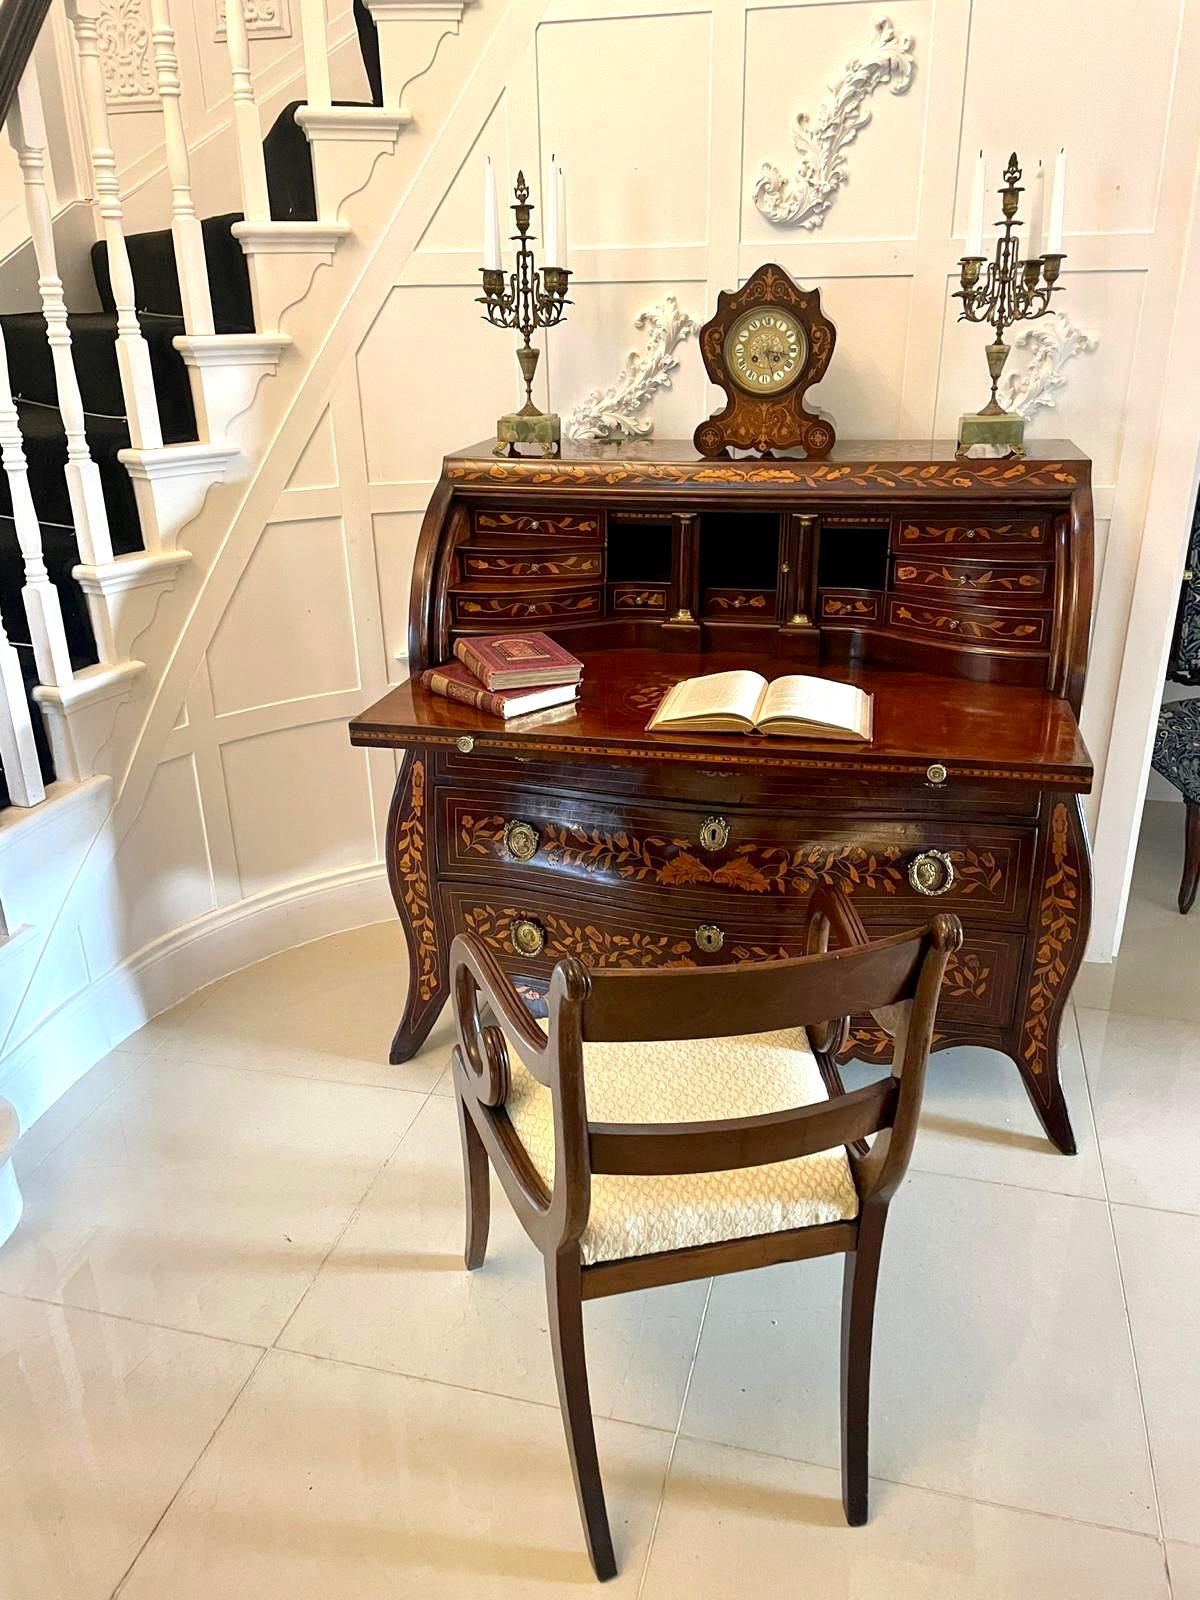 Antique 18th century quality mahogany floral marquetry inlaid cylinder bureau having a fantastic quality mahogany floral marquetry inlaid cylinder bureau opening to reveal a fitted interior consisting of ten shaped drawers, bookends and a door